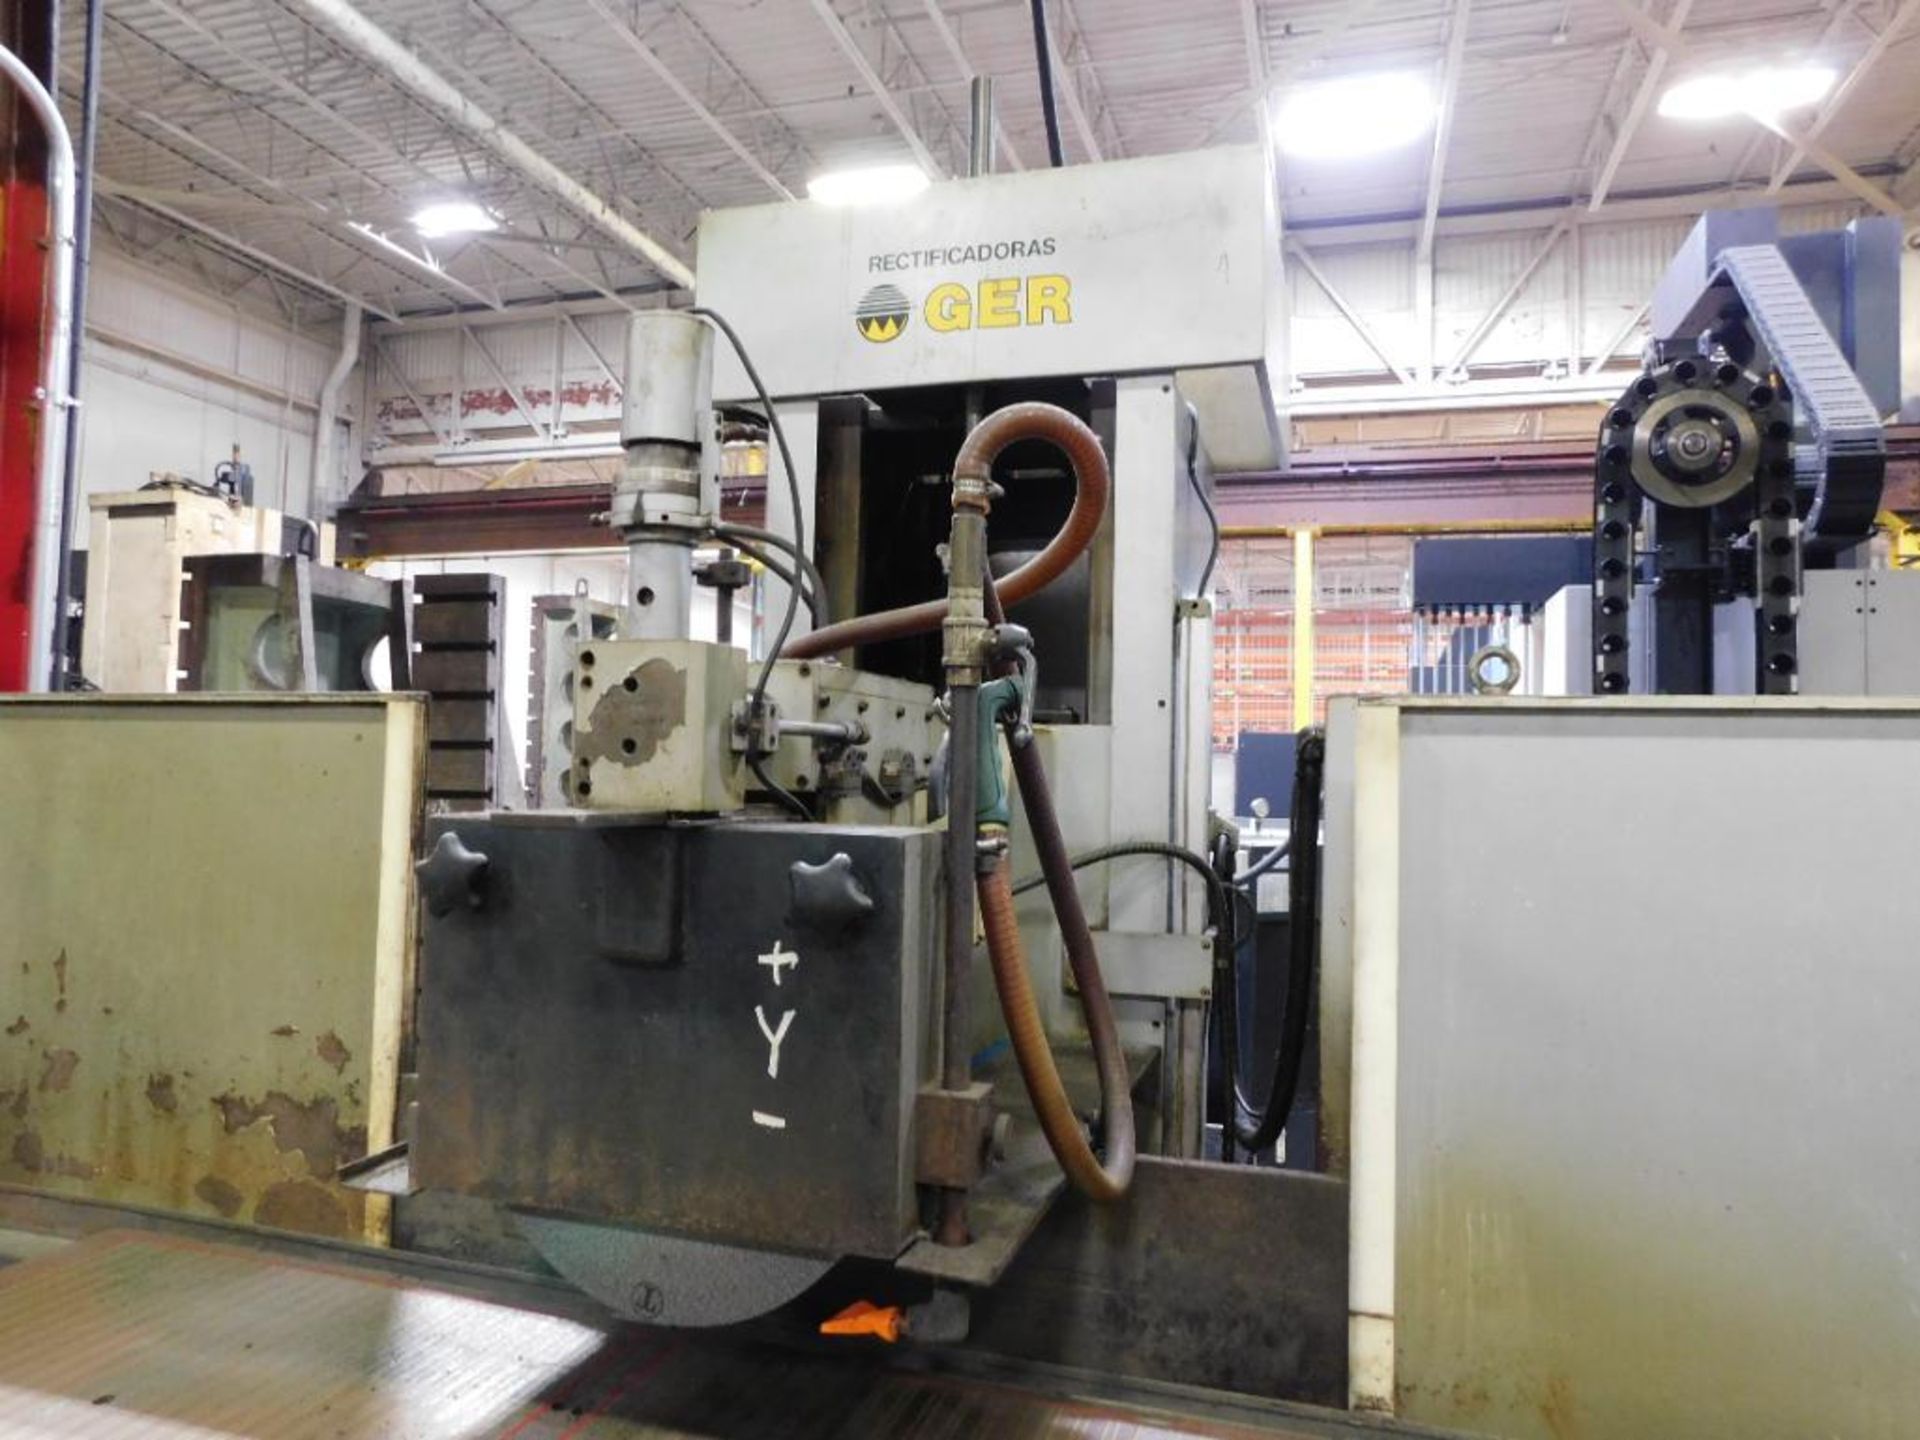 Ger Model RS-15/60 24" x 60" CNC Surface Grinder, S/N: 92/13-50 (1992) ((Unit # 594) w/3-Axis, Elect - Image 4 of 8